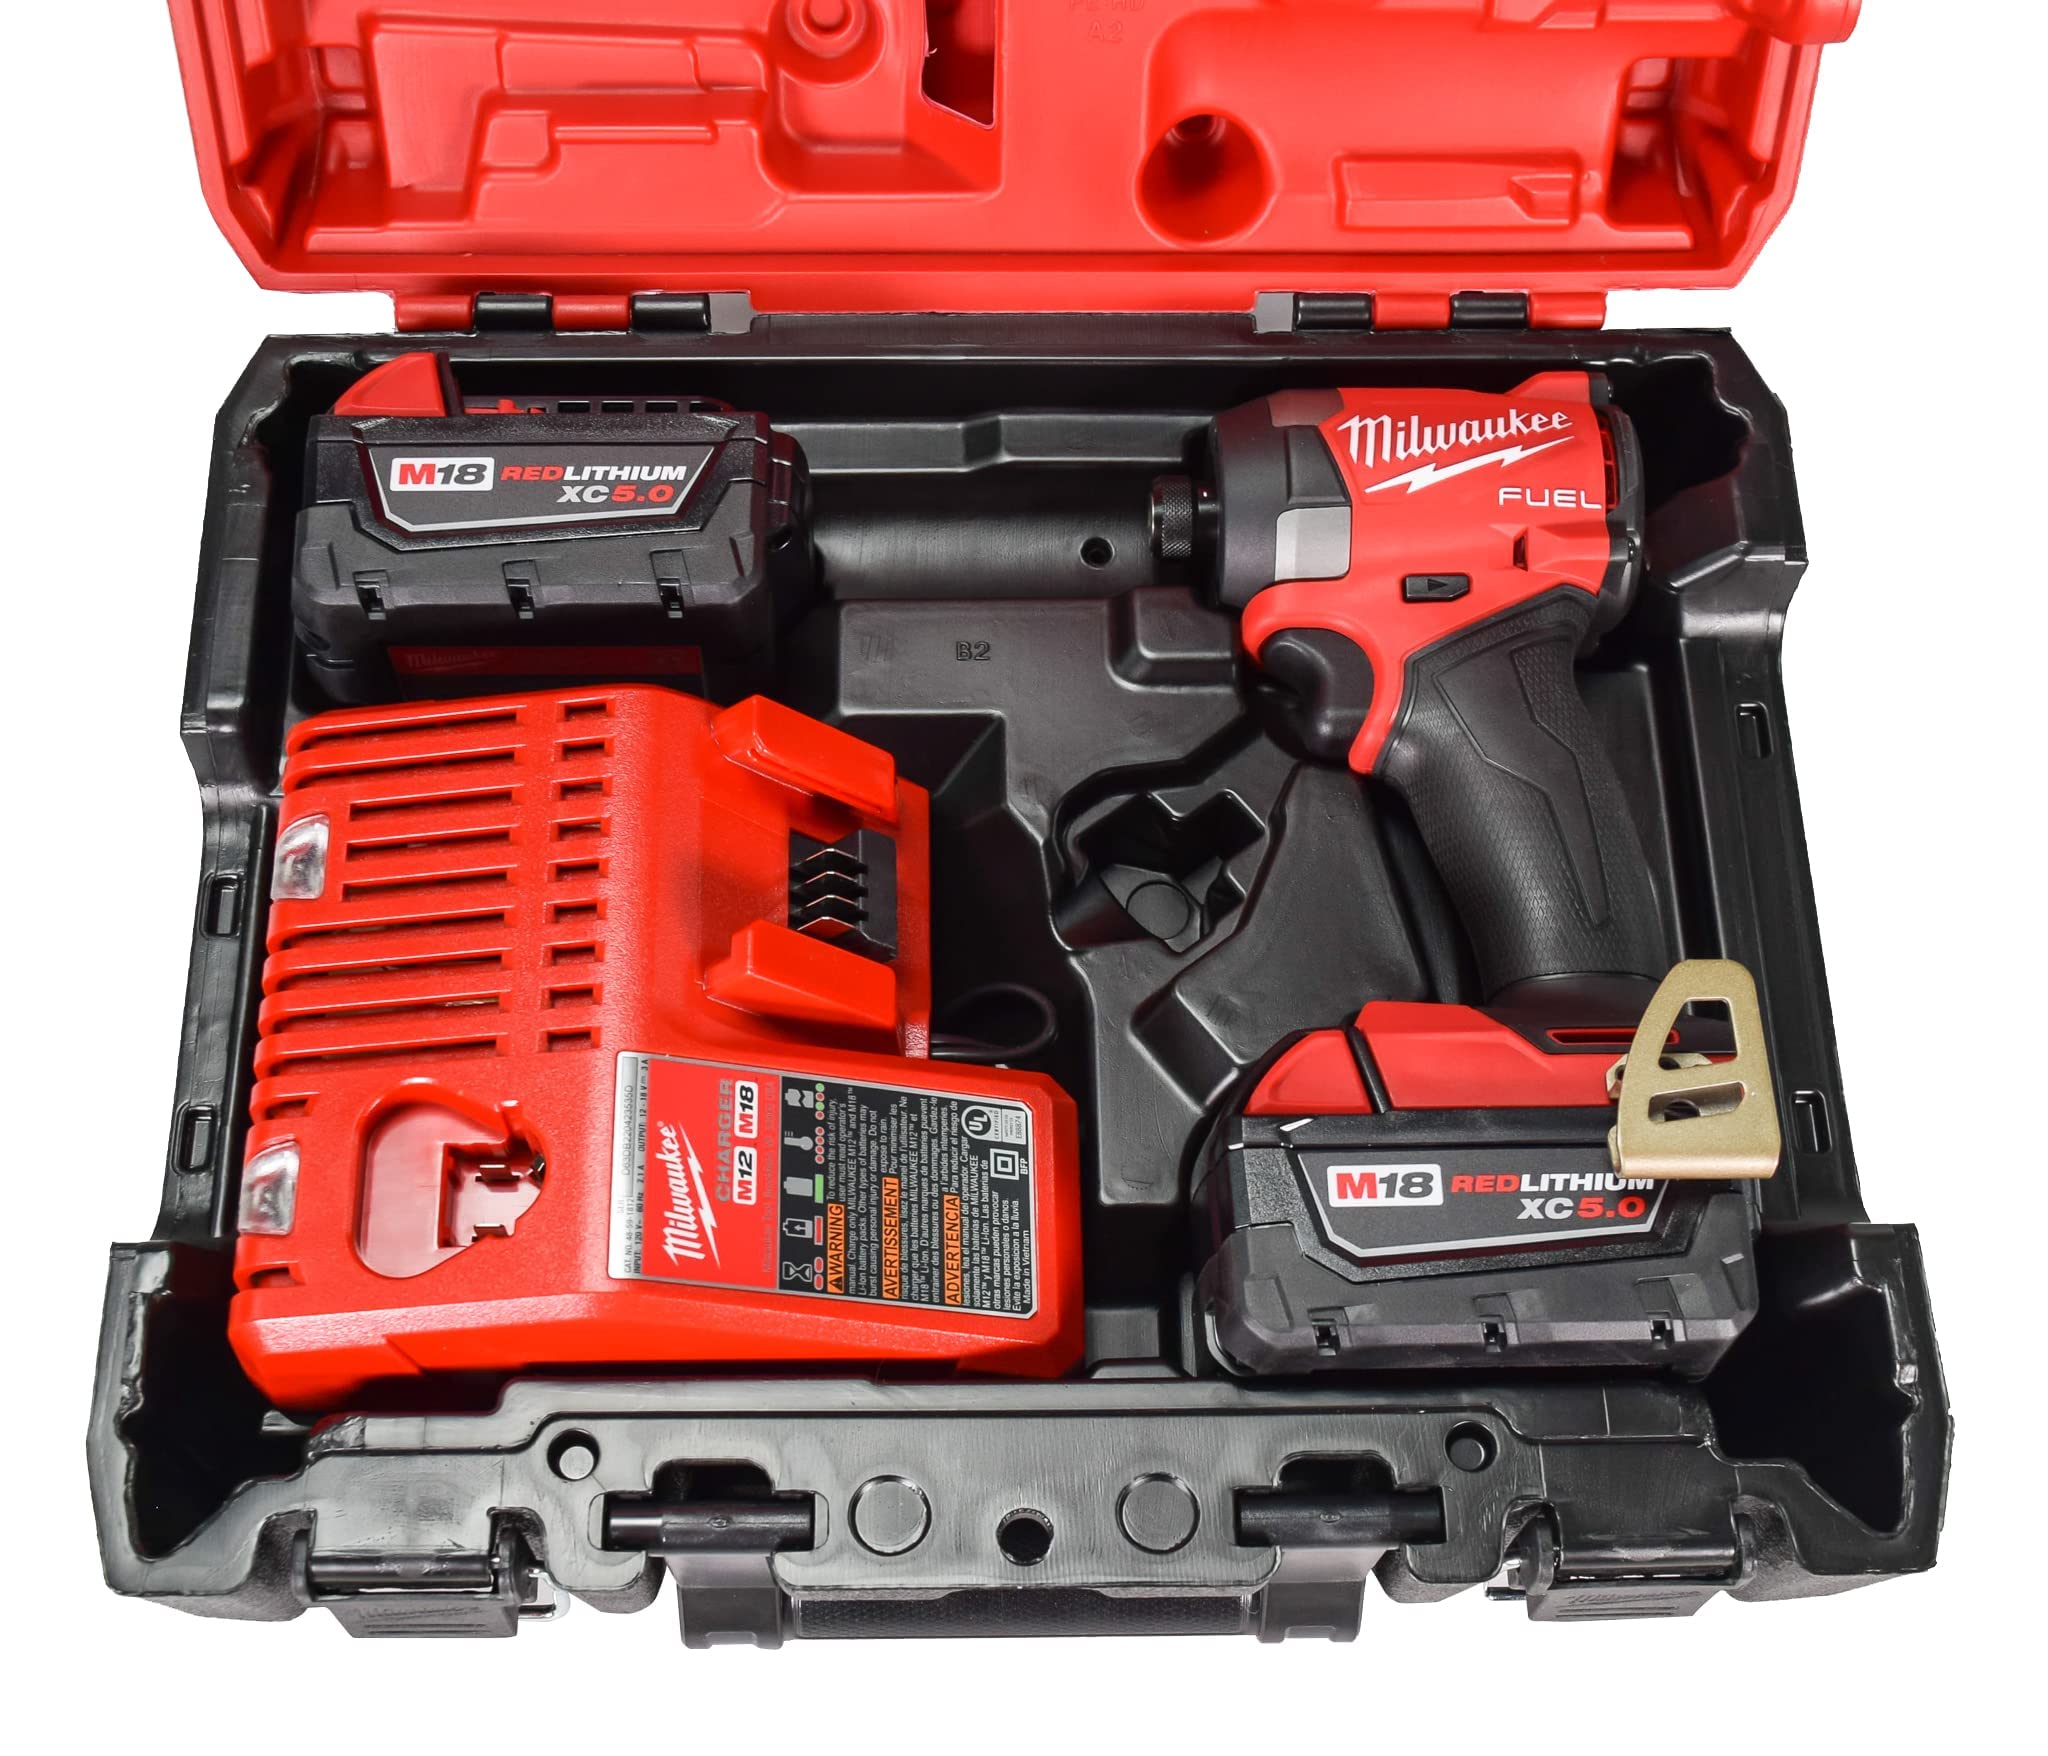 Milwaukee 2953-22 18V Cordless Brushless 1/4" Hex Impact Driver Kit with (2) 5.0Ah Lithium Ion Batteries, Charger & Tool Case